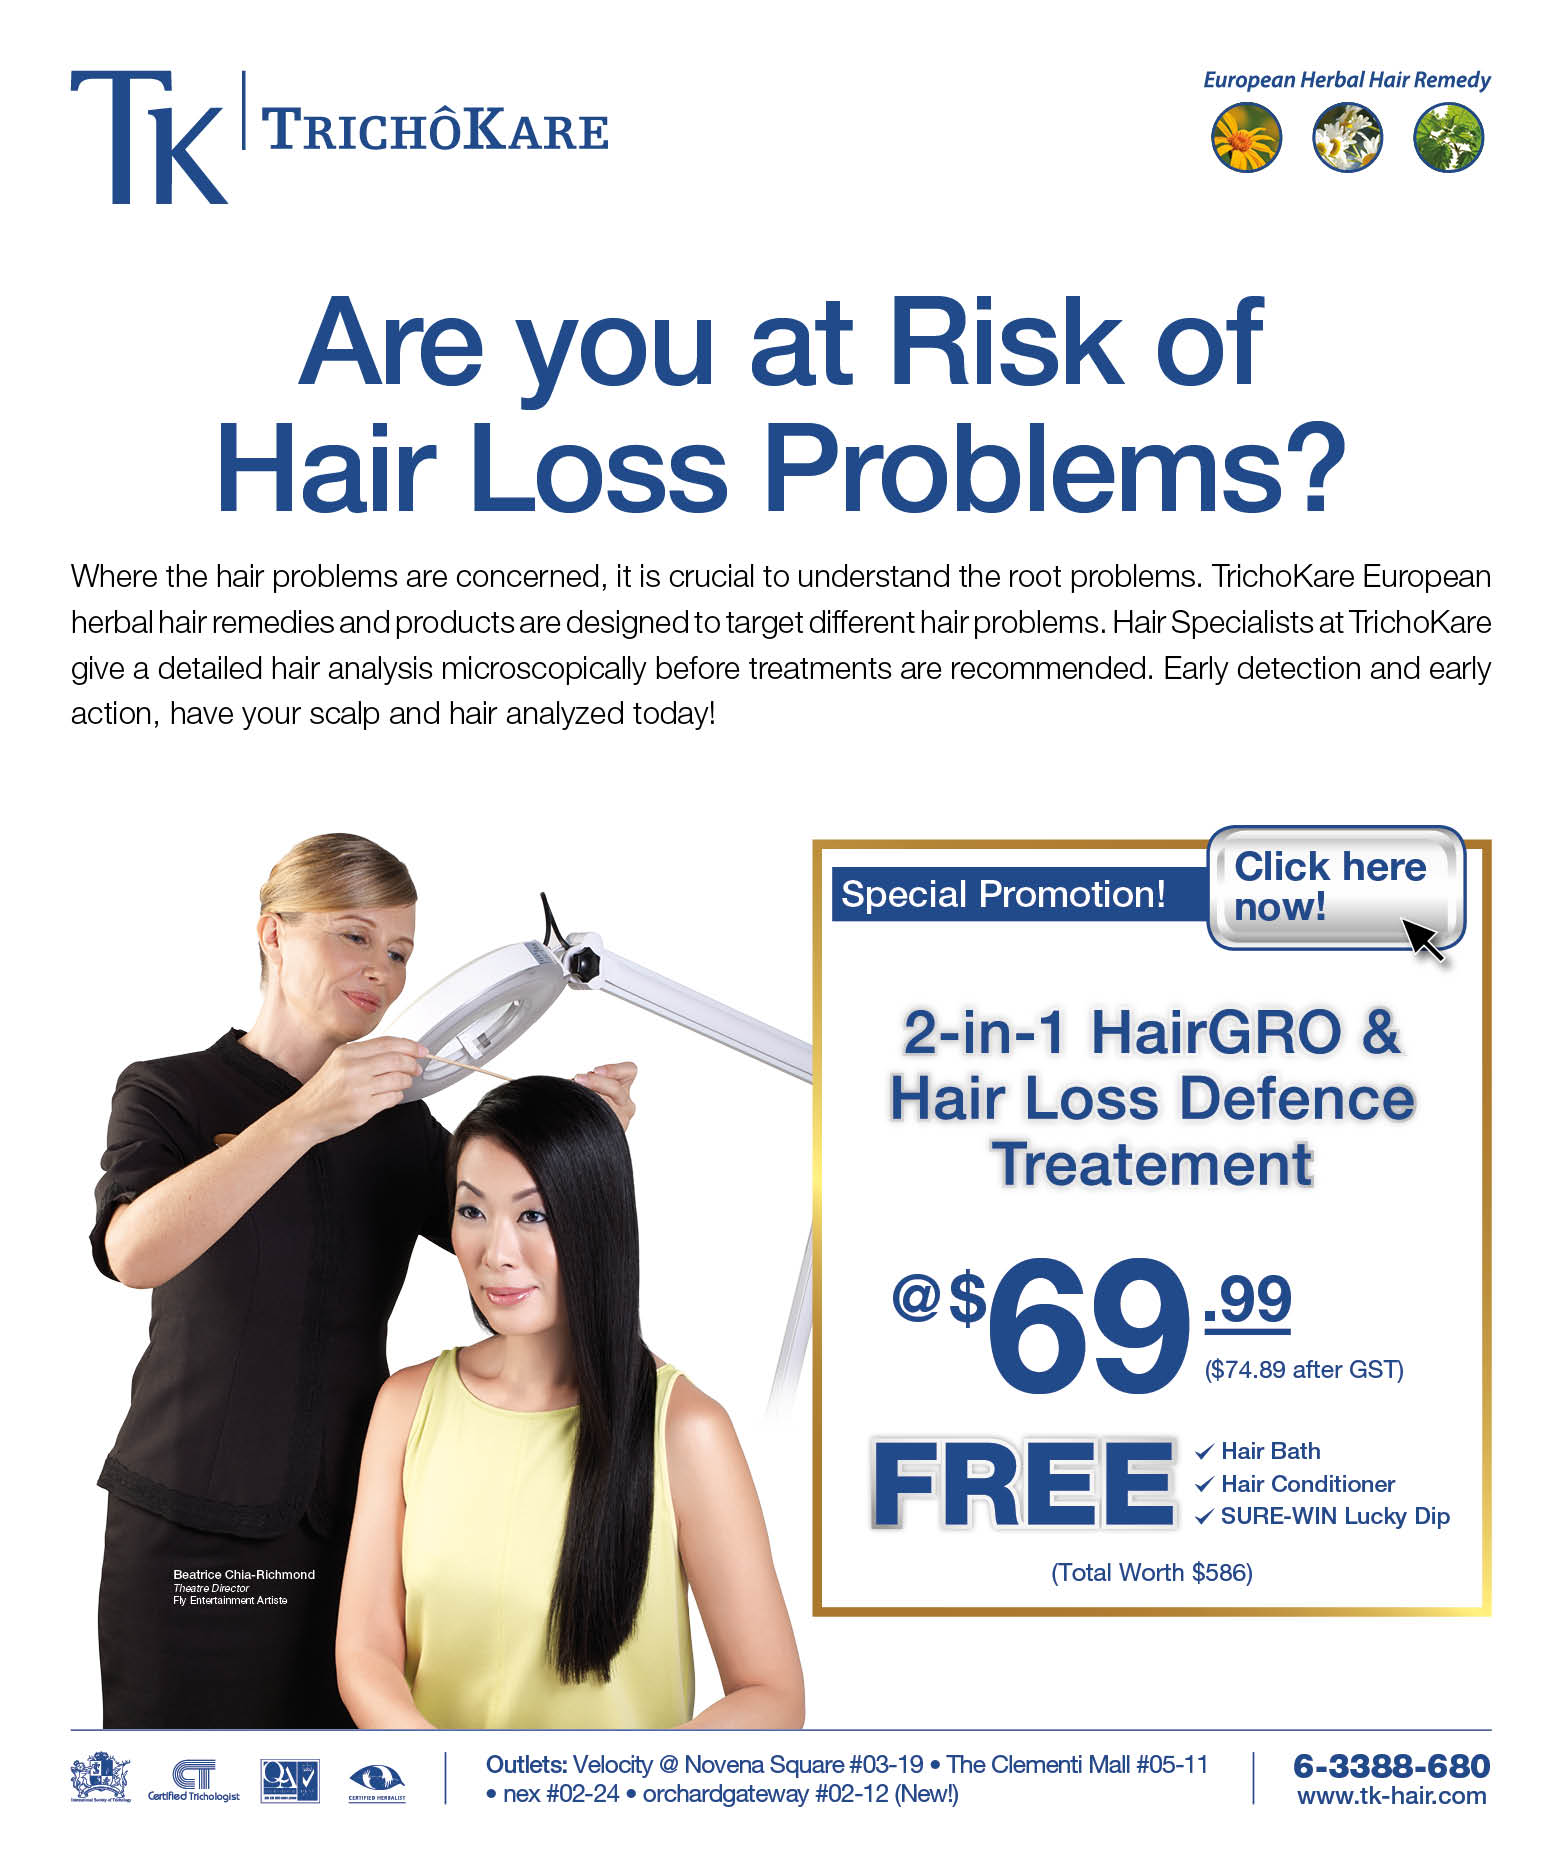 Are you ar Risk of Hair Loss Problems? Where the hair problems are concerned, it is crucial to understand the root problems. TrichoKare European herbal remedies and products are designed to target different hair problems. Hair Specialists at TrichoKare give a detailed hair analysis microscopically before treatments are recommended. Early detection and early action, have your scalp and hair analyzed today! Special promotion! 2-in-1 HairGRO & Hair Loss Defence Treatment at $69.99*. Free Hair Bath, Hair Conditioner and SURE-WIN Lucky Dip.